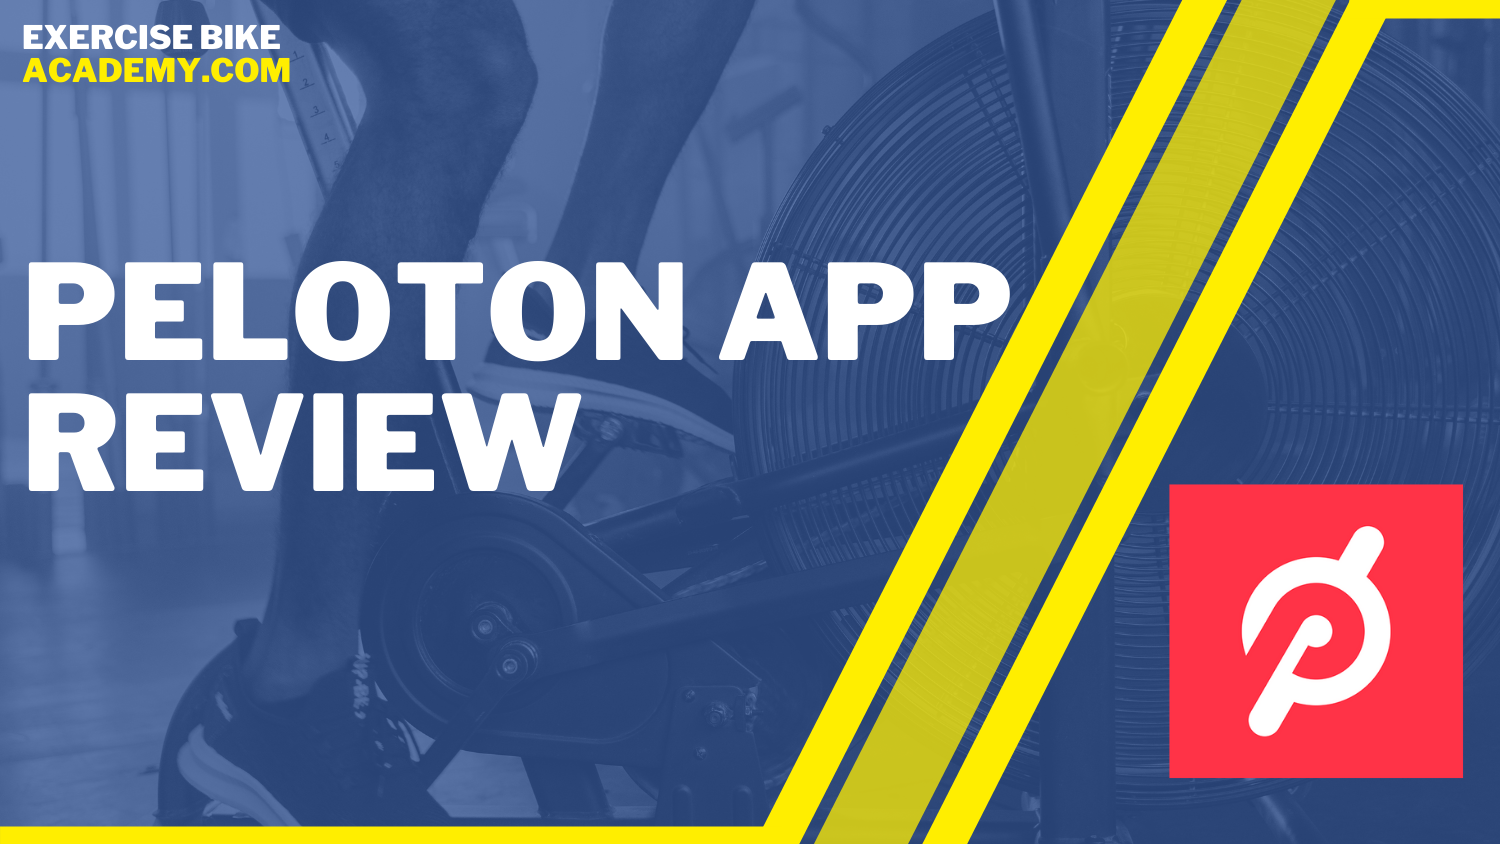 Peloton App Review: What You Should Know Before Your First Peloton Class